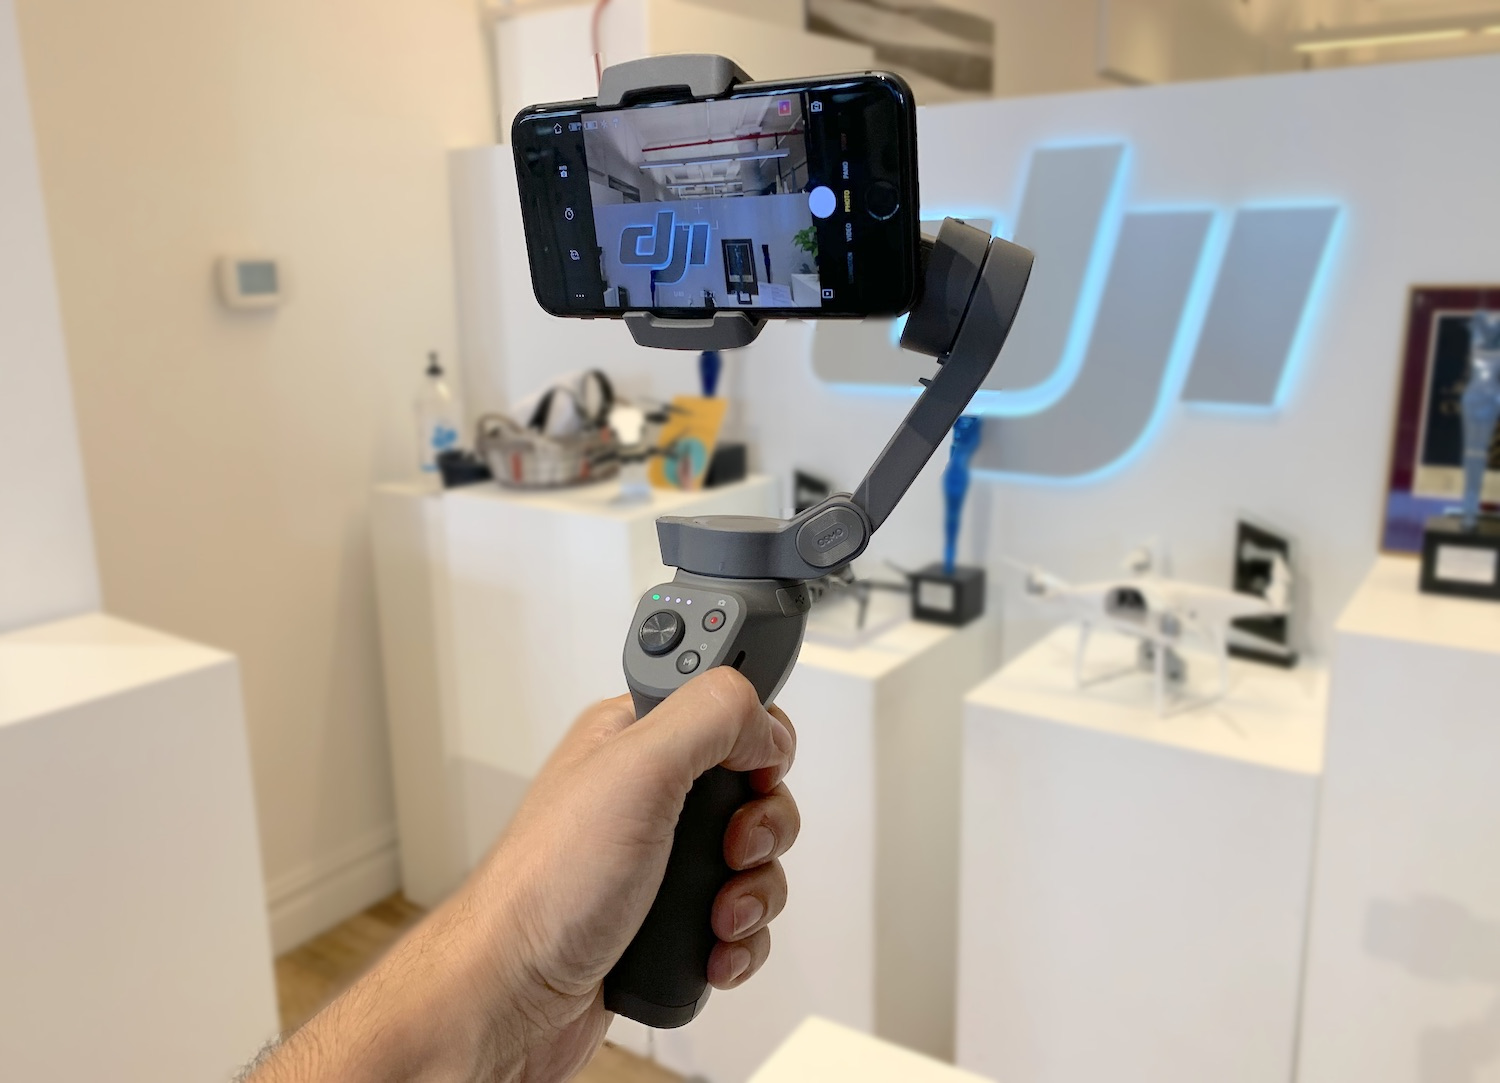 DJI Osmo Mobile 3 Review: Hands-on | Tom's Guide